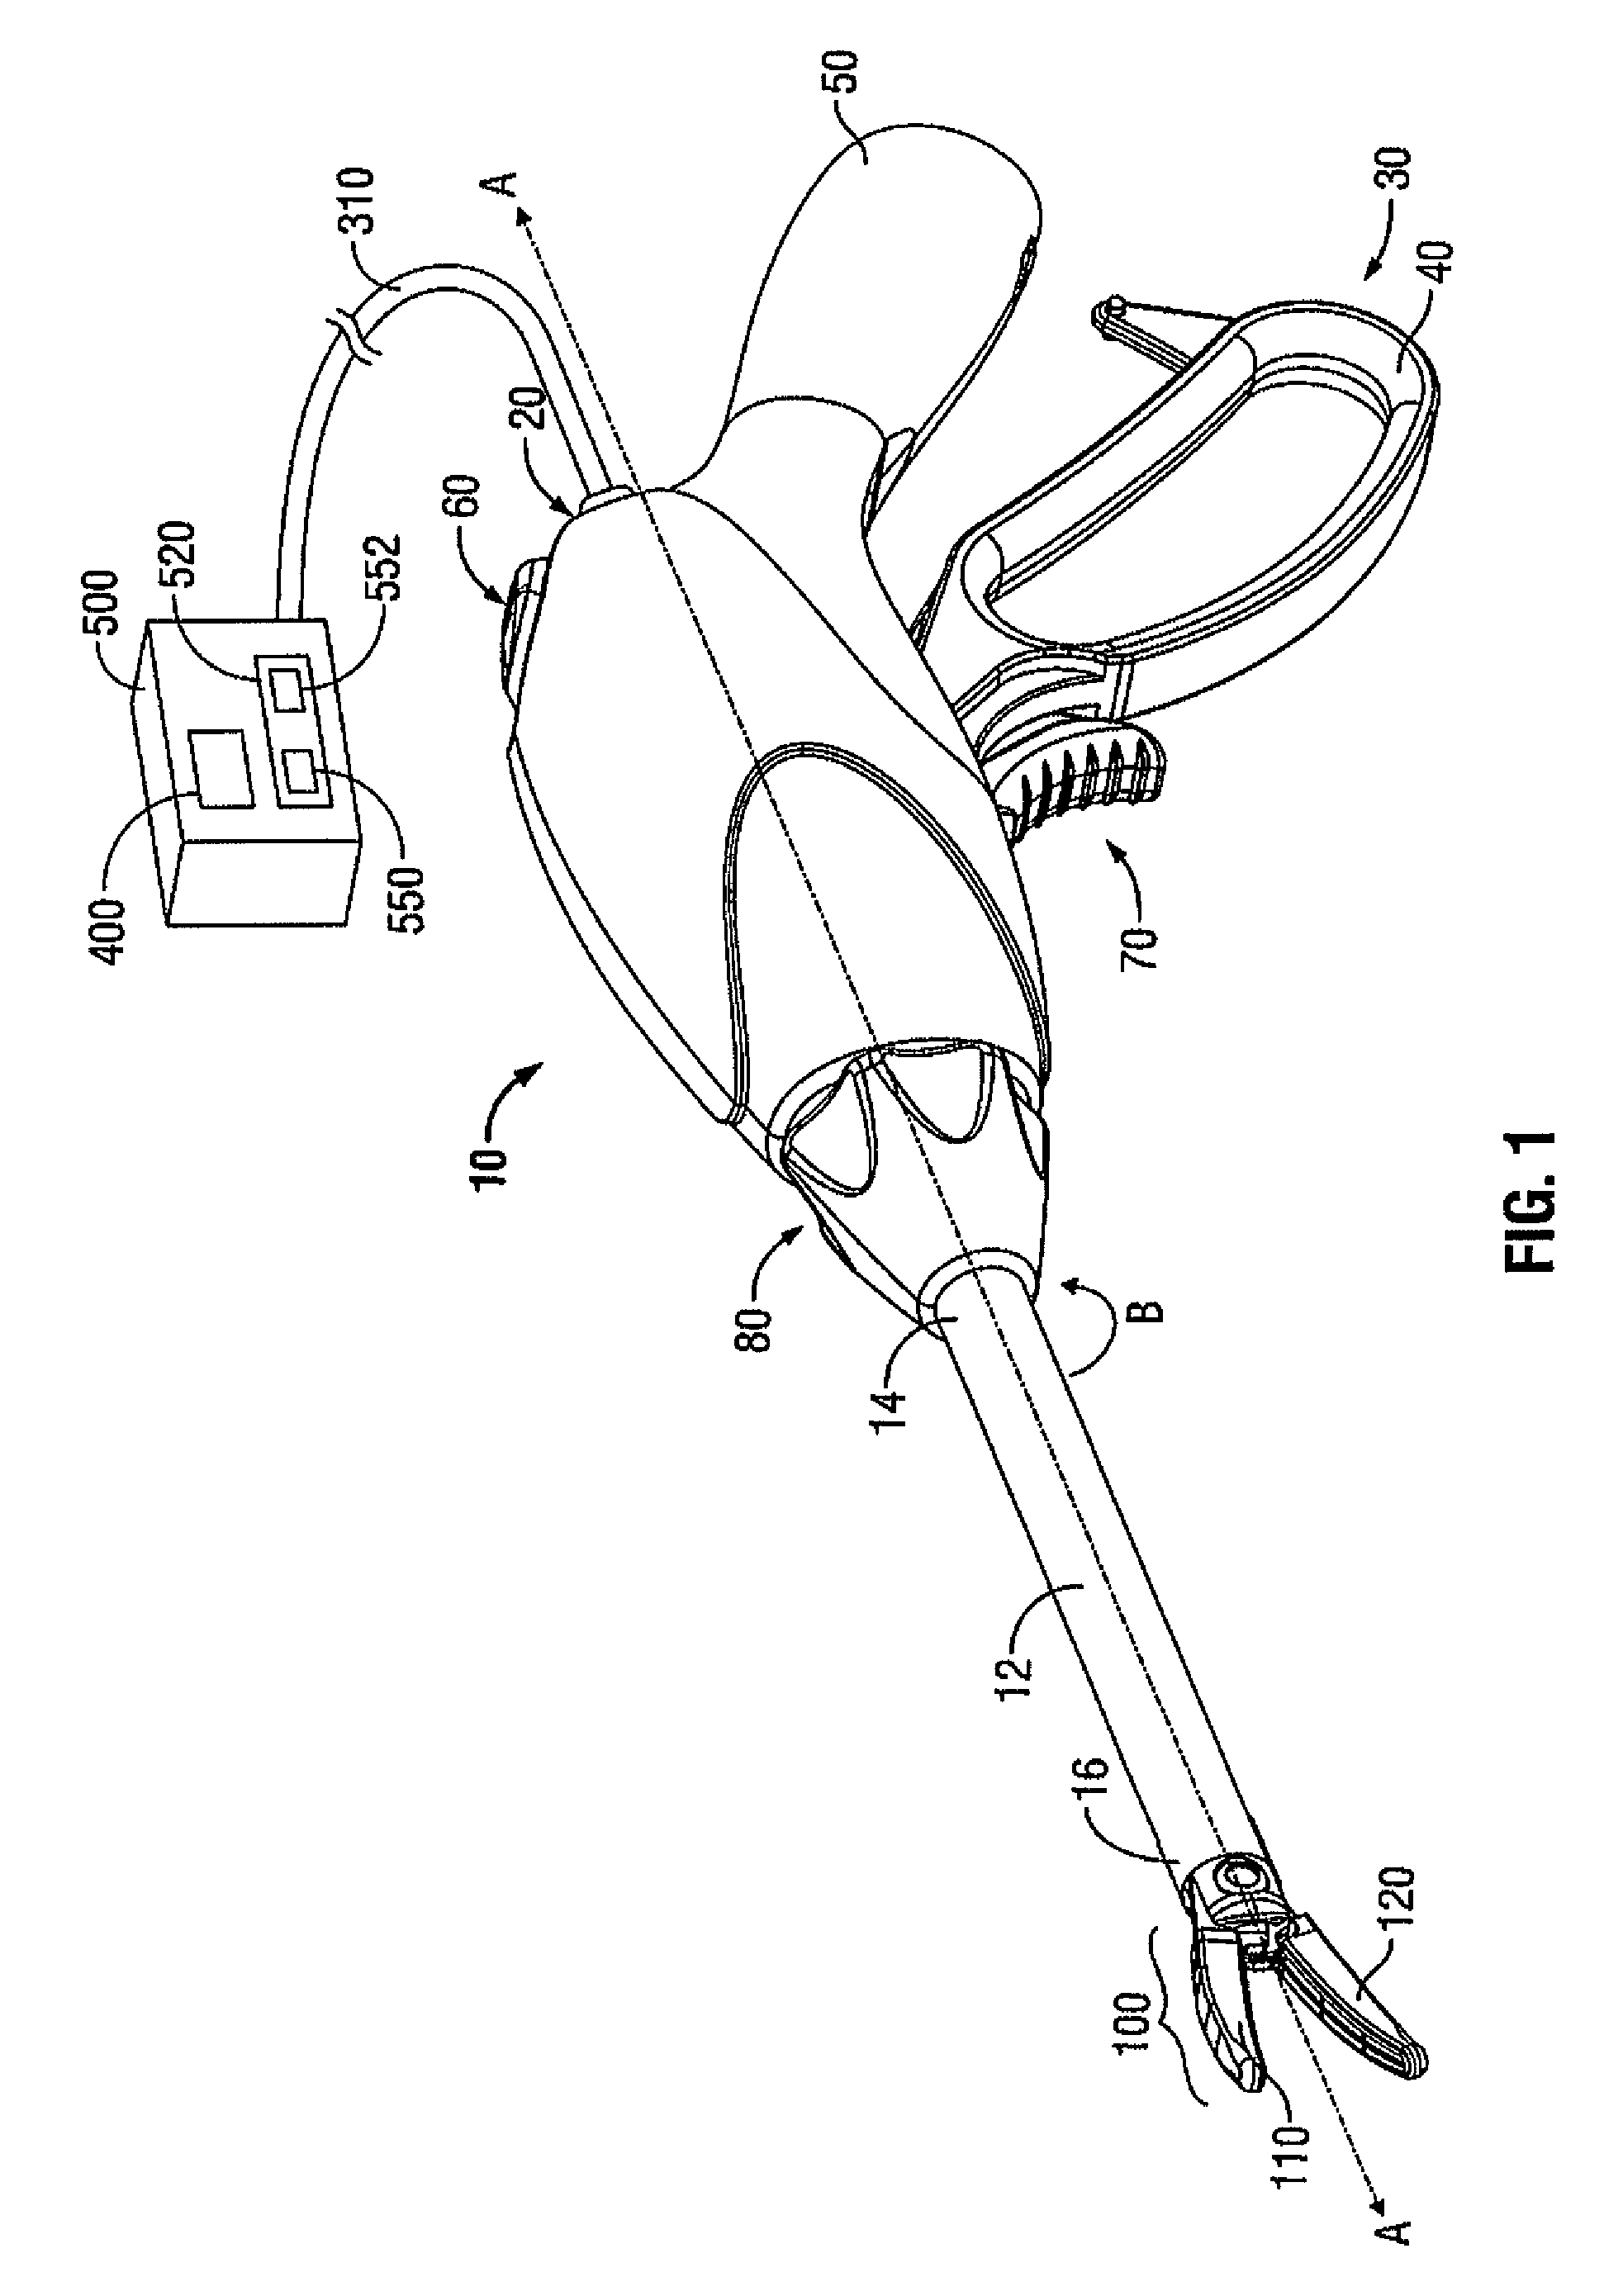 Apparatus, system and method for monitoring tissue during an electrosurgical procedure